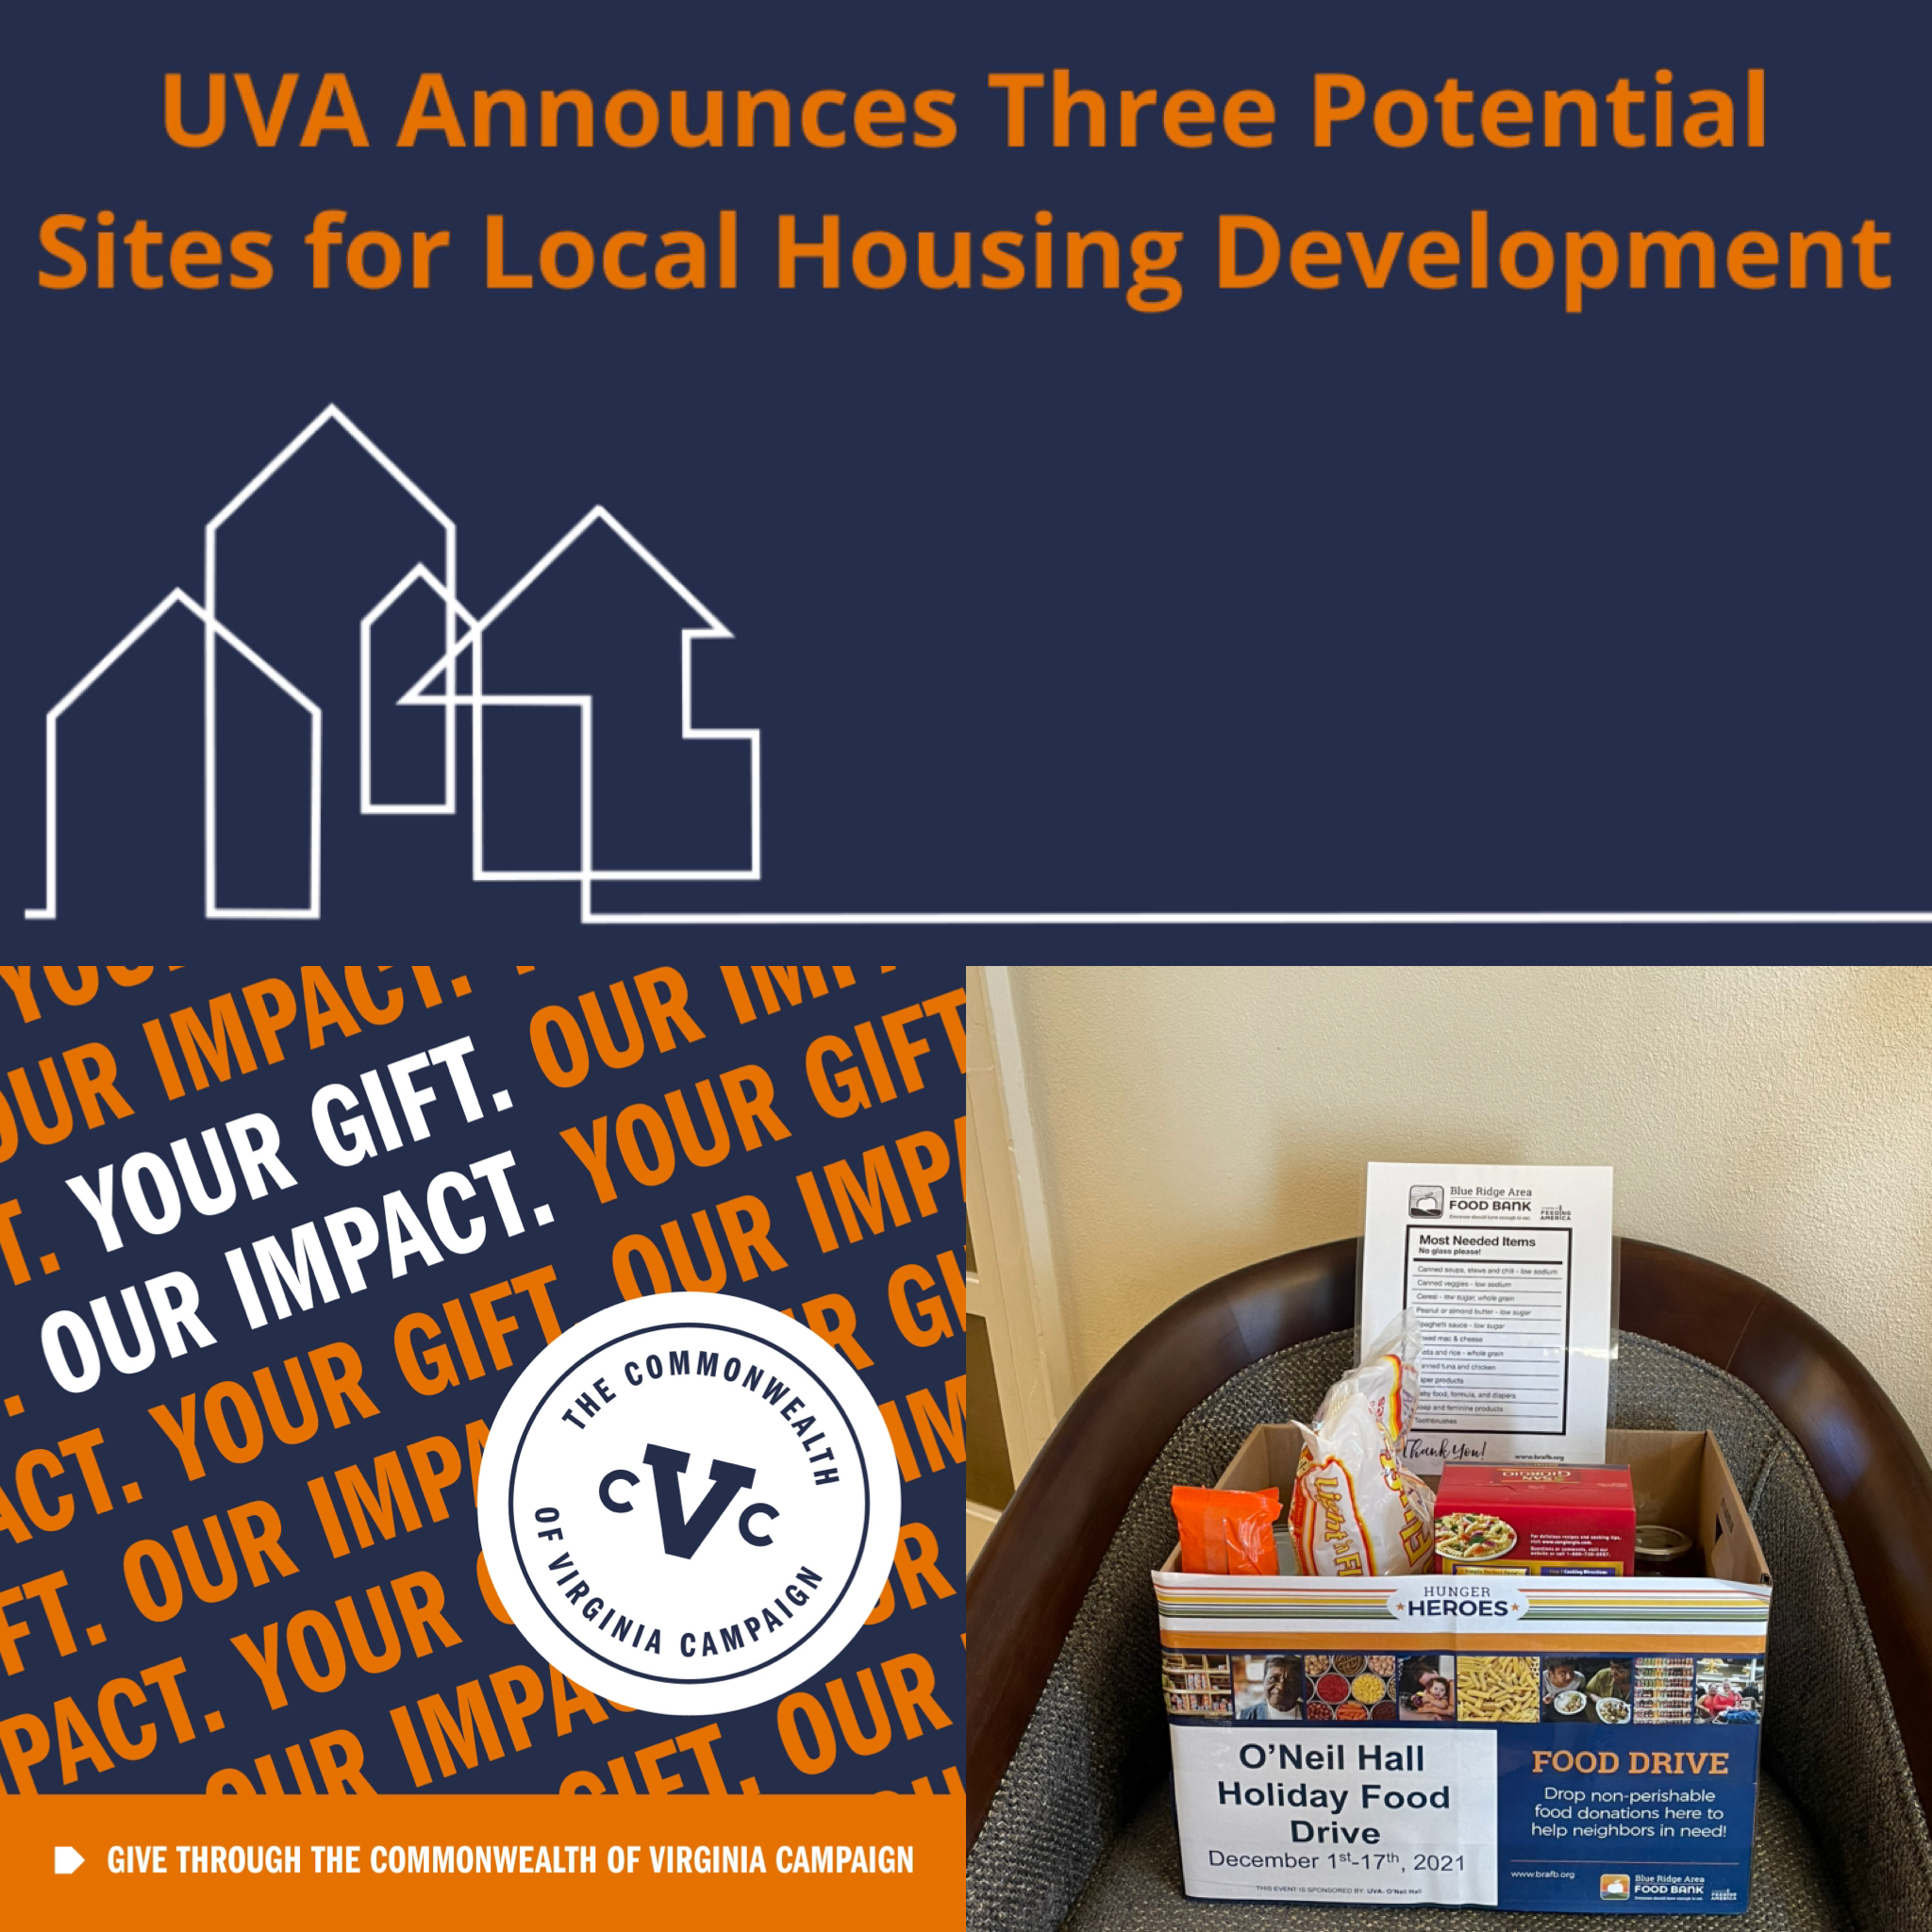 Affordable Housing sites selected, CVC, O'Neil Hall Food Drive